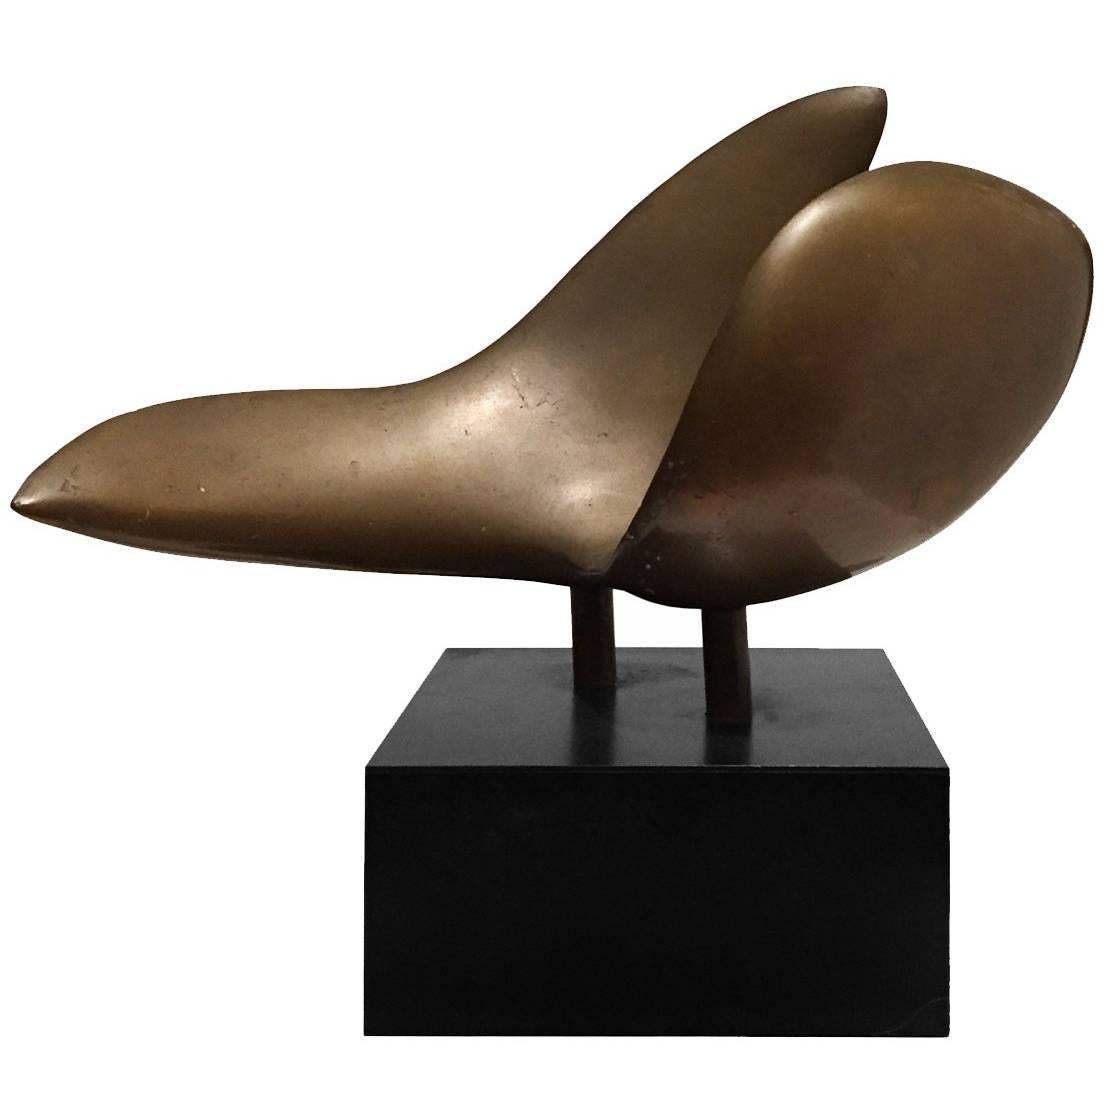 1970s Abstract Bronze Curved Wing Sculpture on Black Base